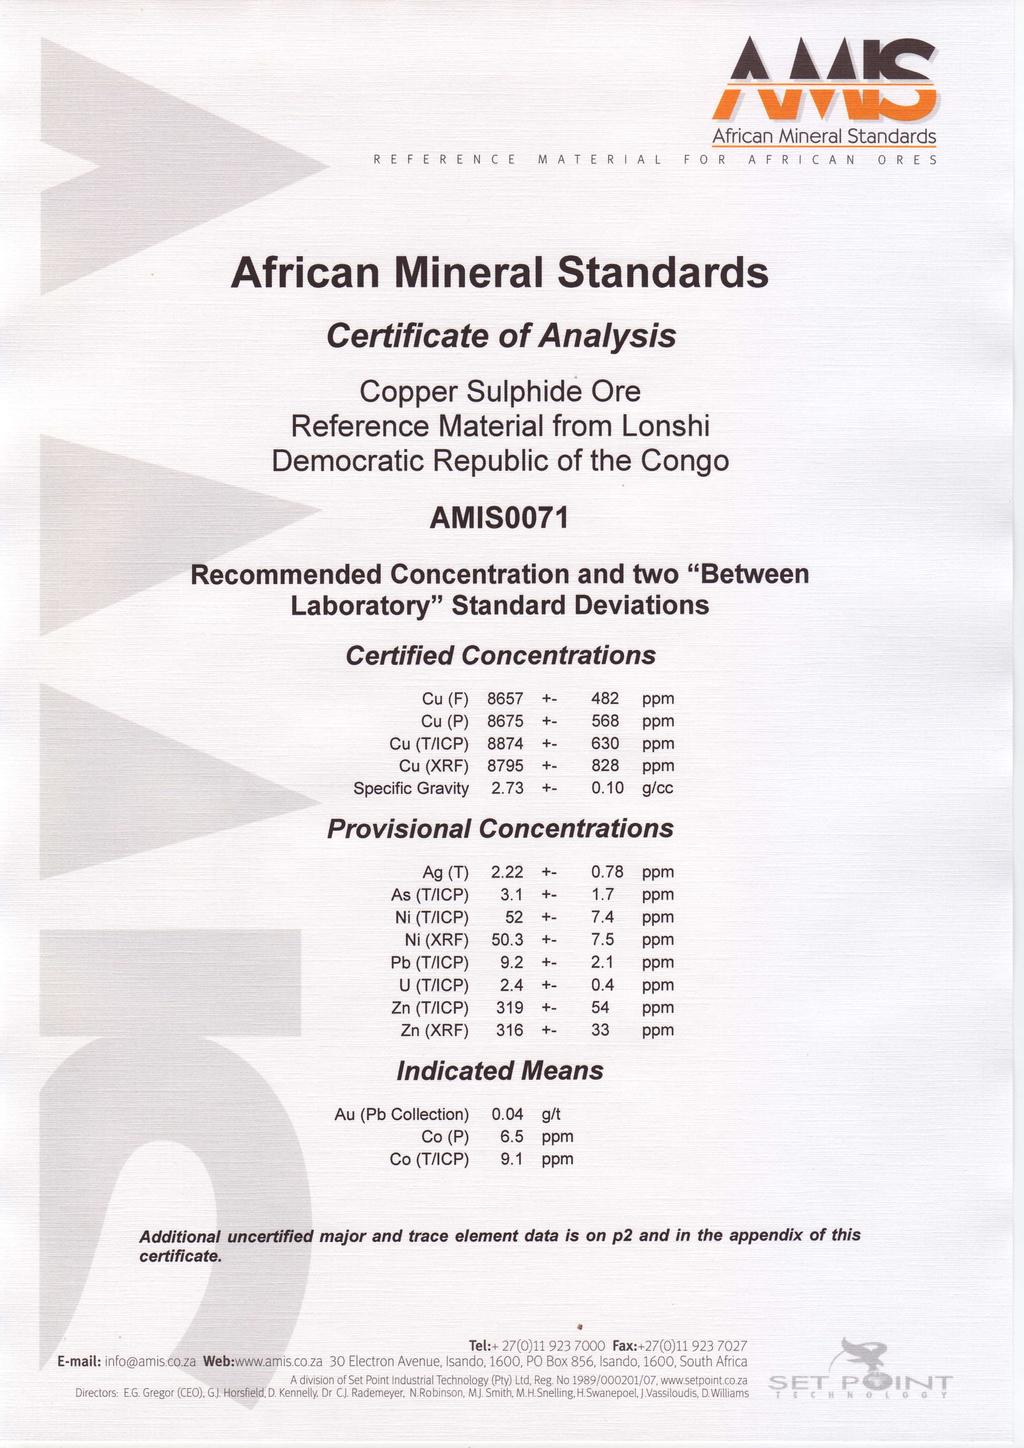 A Allc f lfvlti, Afric_ an iaineral Standardg R E F E R E N C E M A T E R A L F O R A F R C A N O R E S African Mineral Standards Certifi c ate of An arysrb Copper Sulphide Ore Reference Material